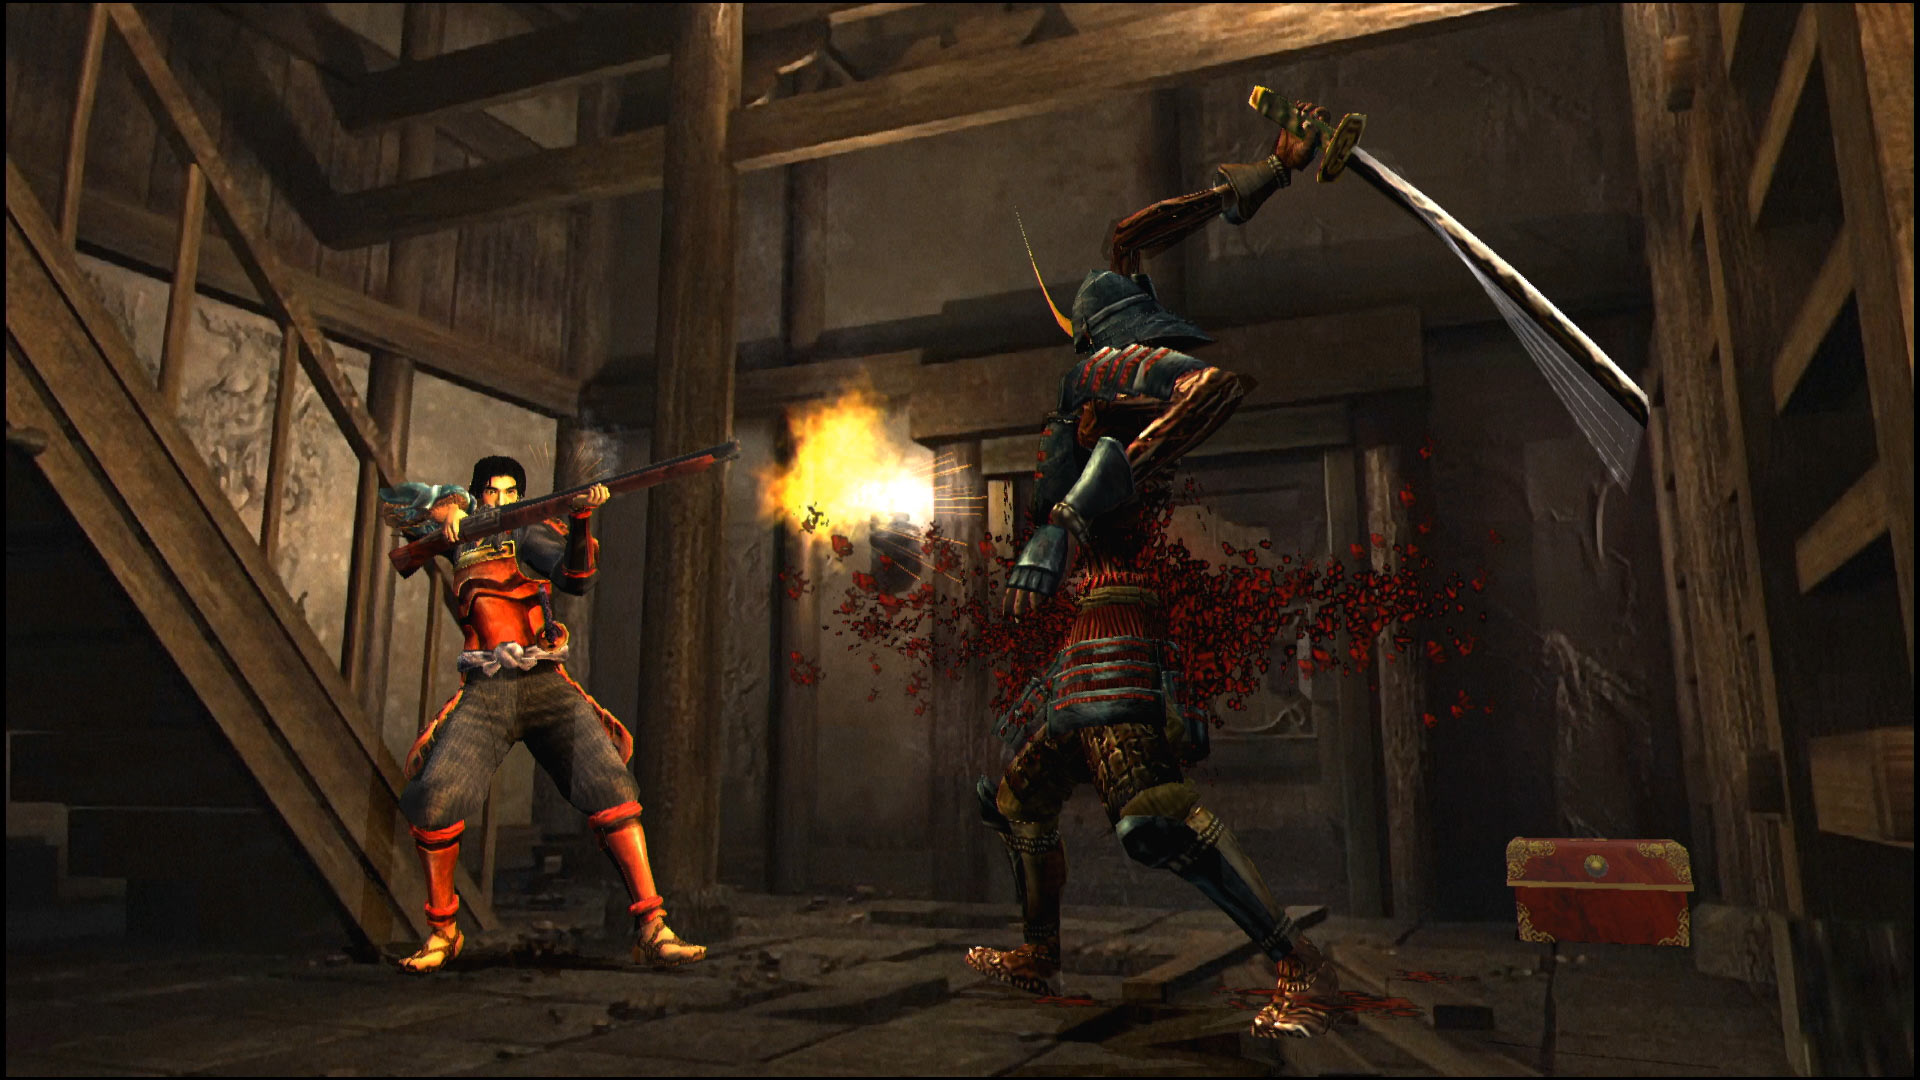 Onimusha' Review: Slick, Ferocious, and Surprisingly Touching